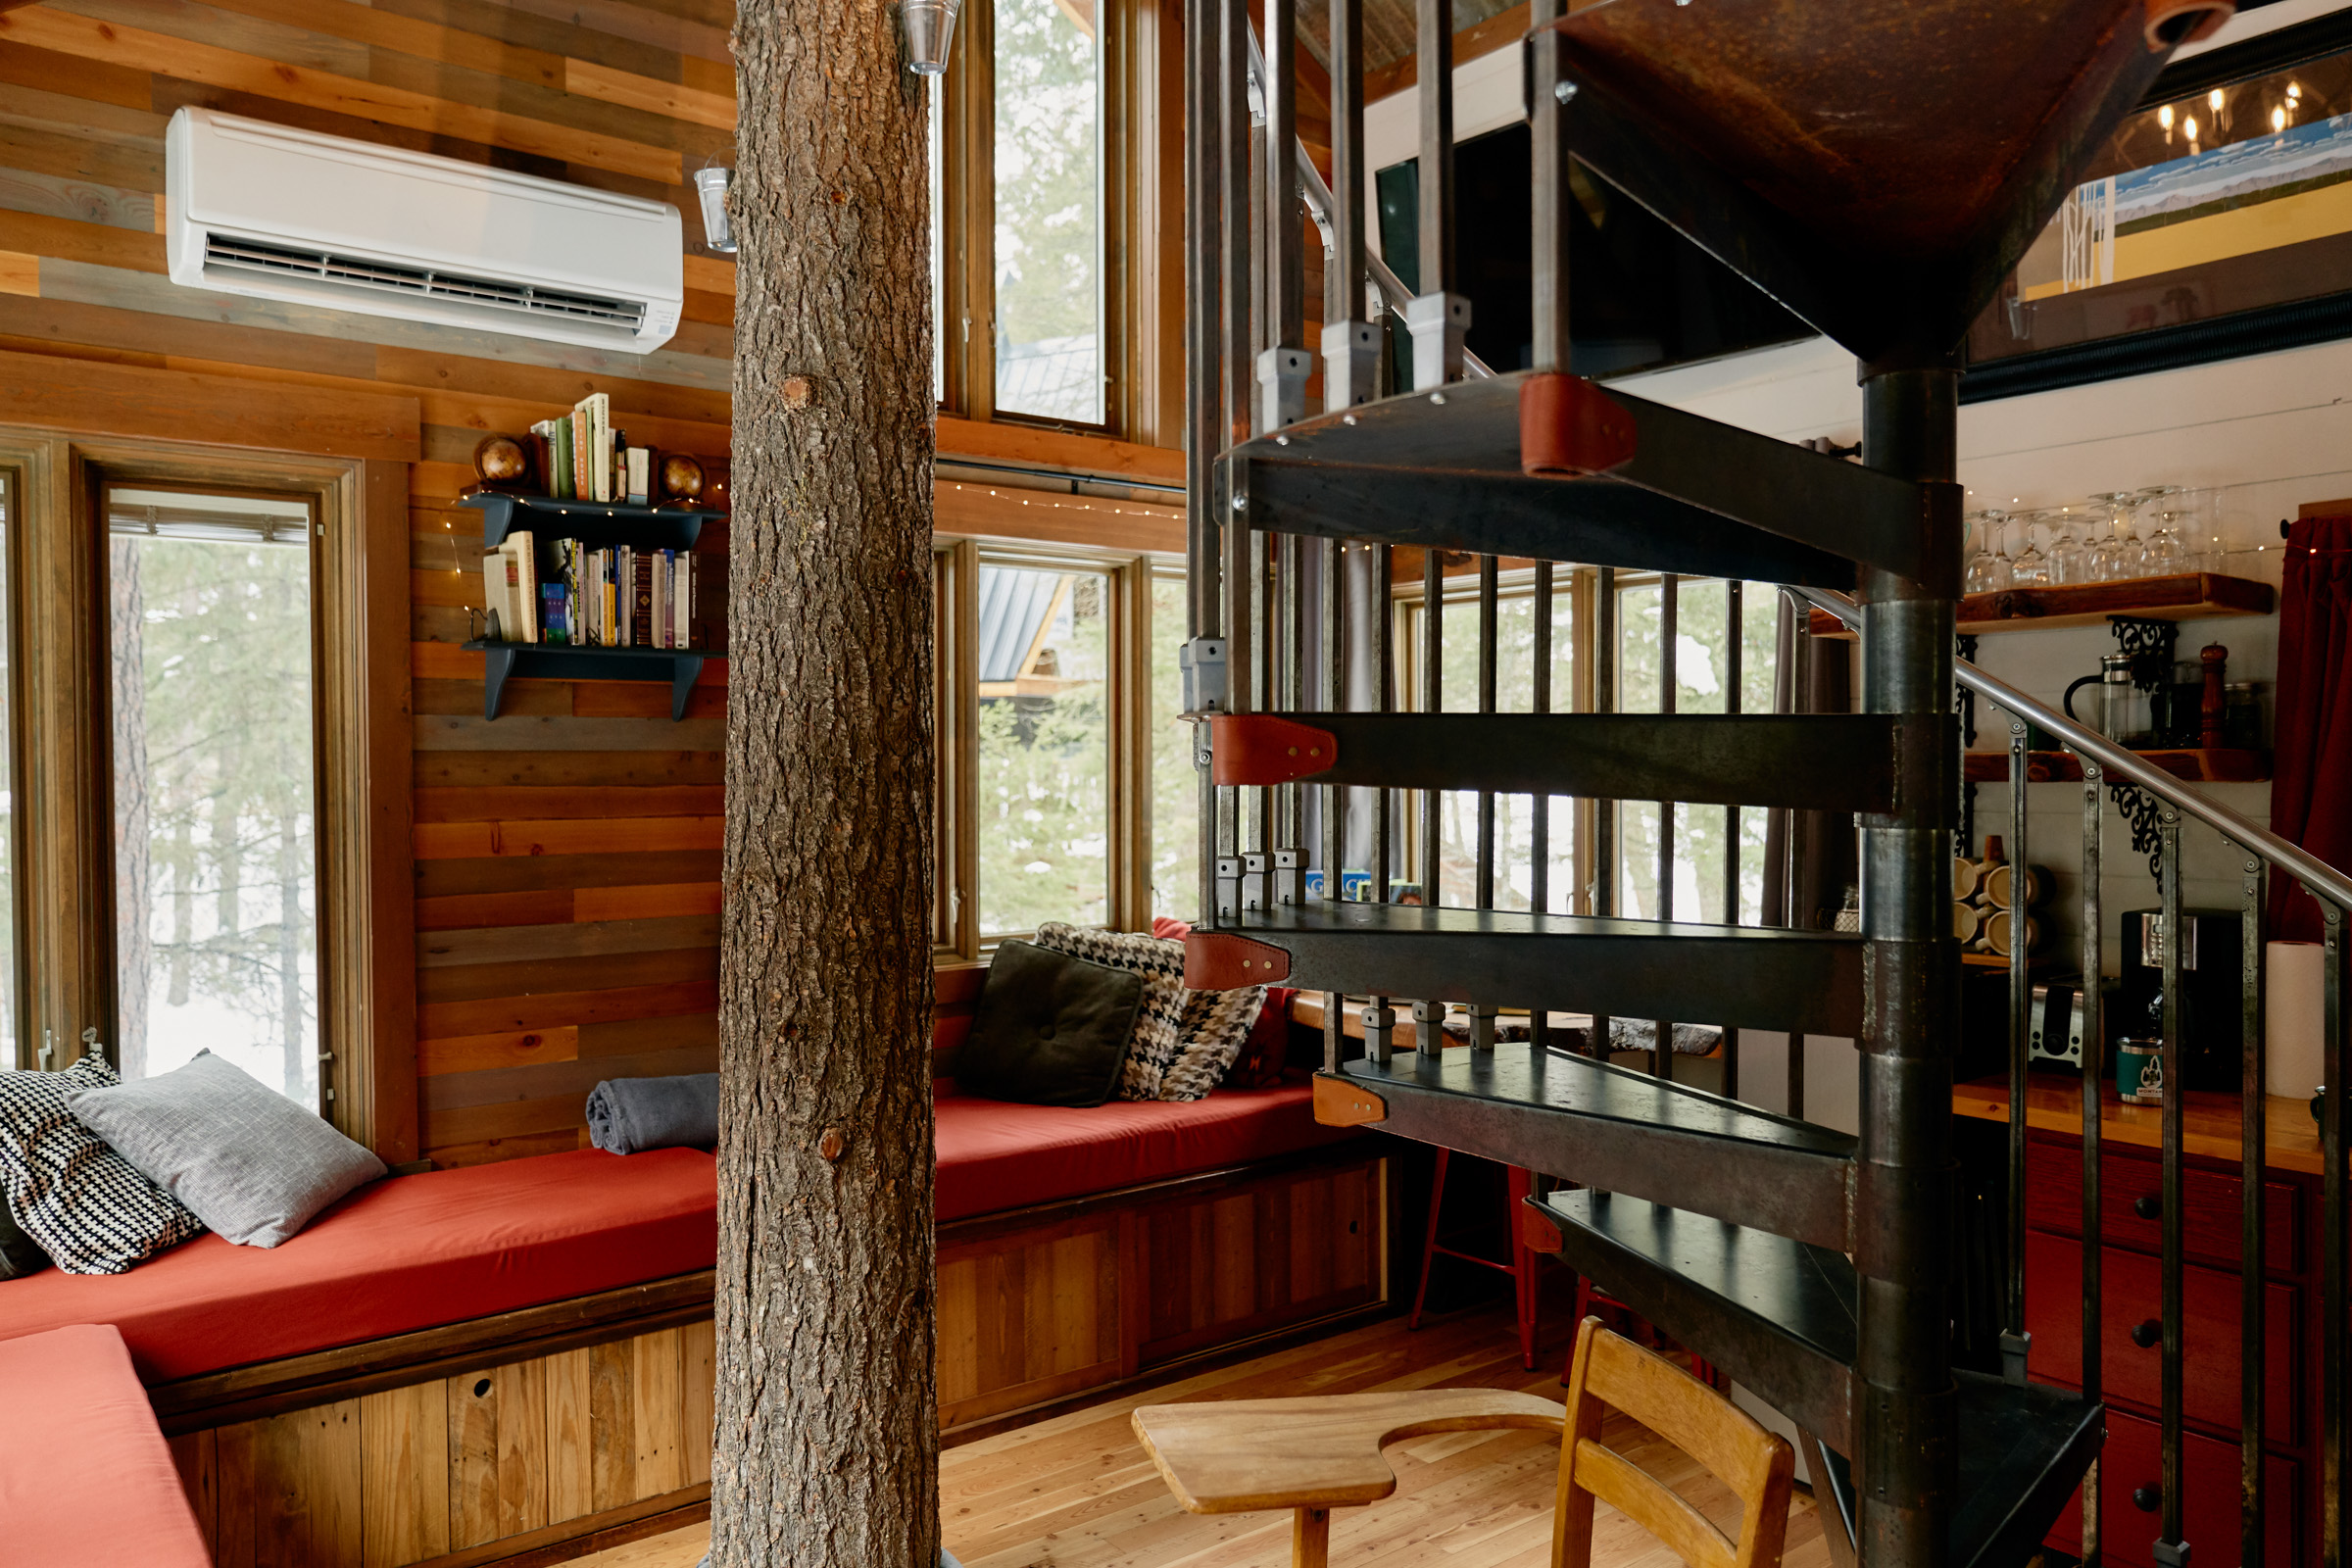 Interior log cabin with a spiral metal staircase in the foreground and a red cushioned nook in the background.